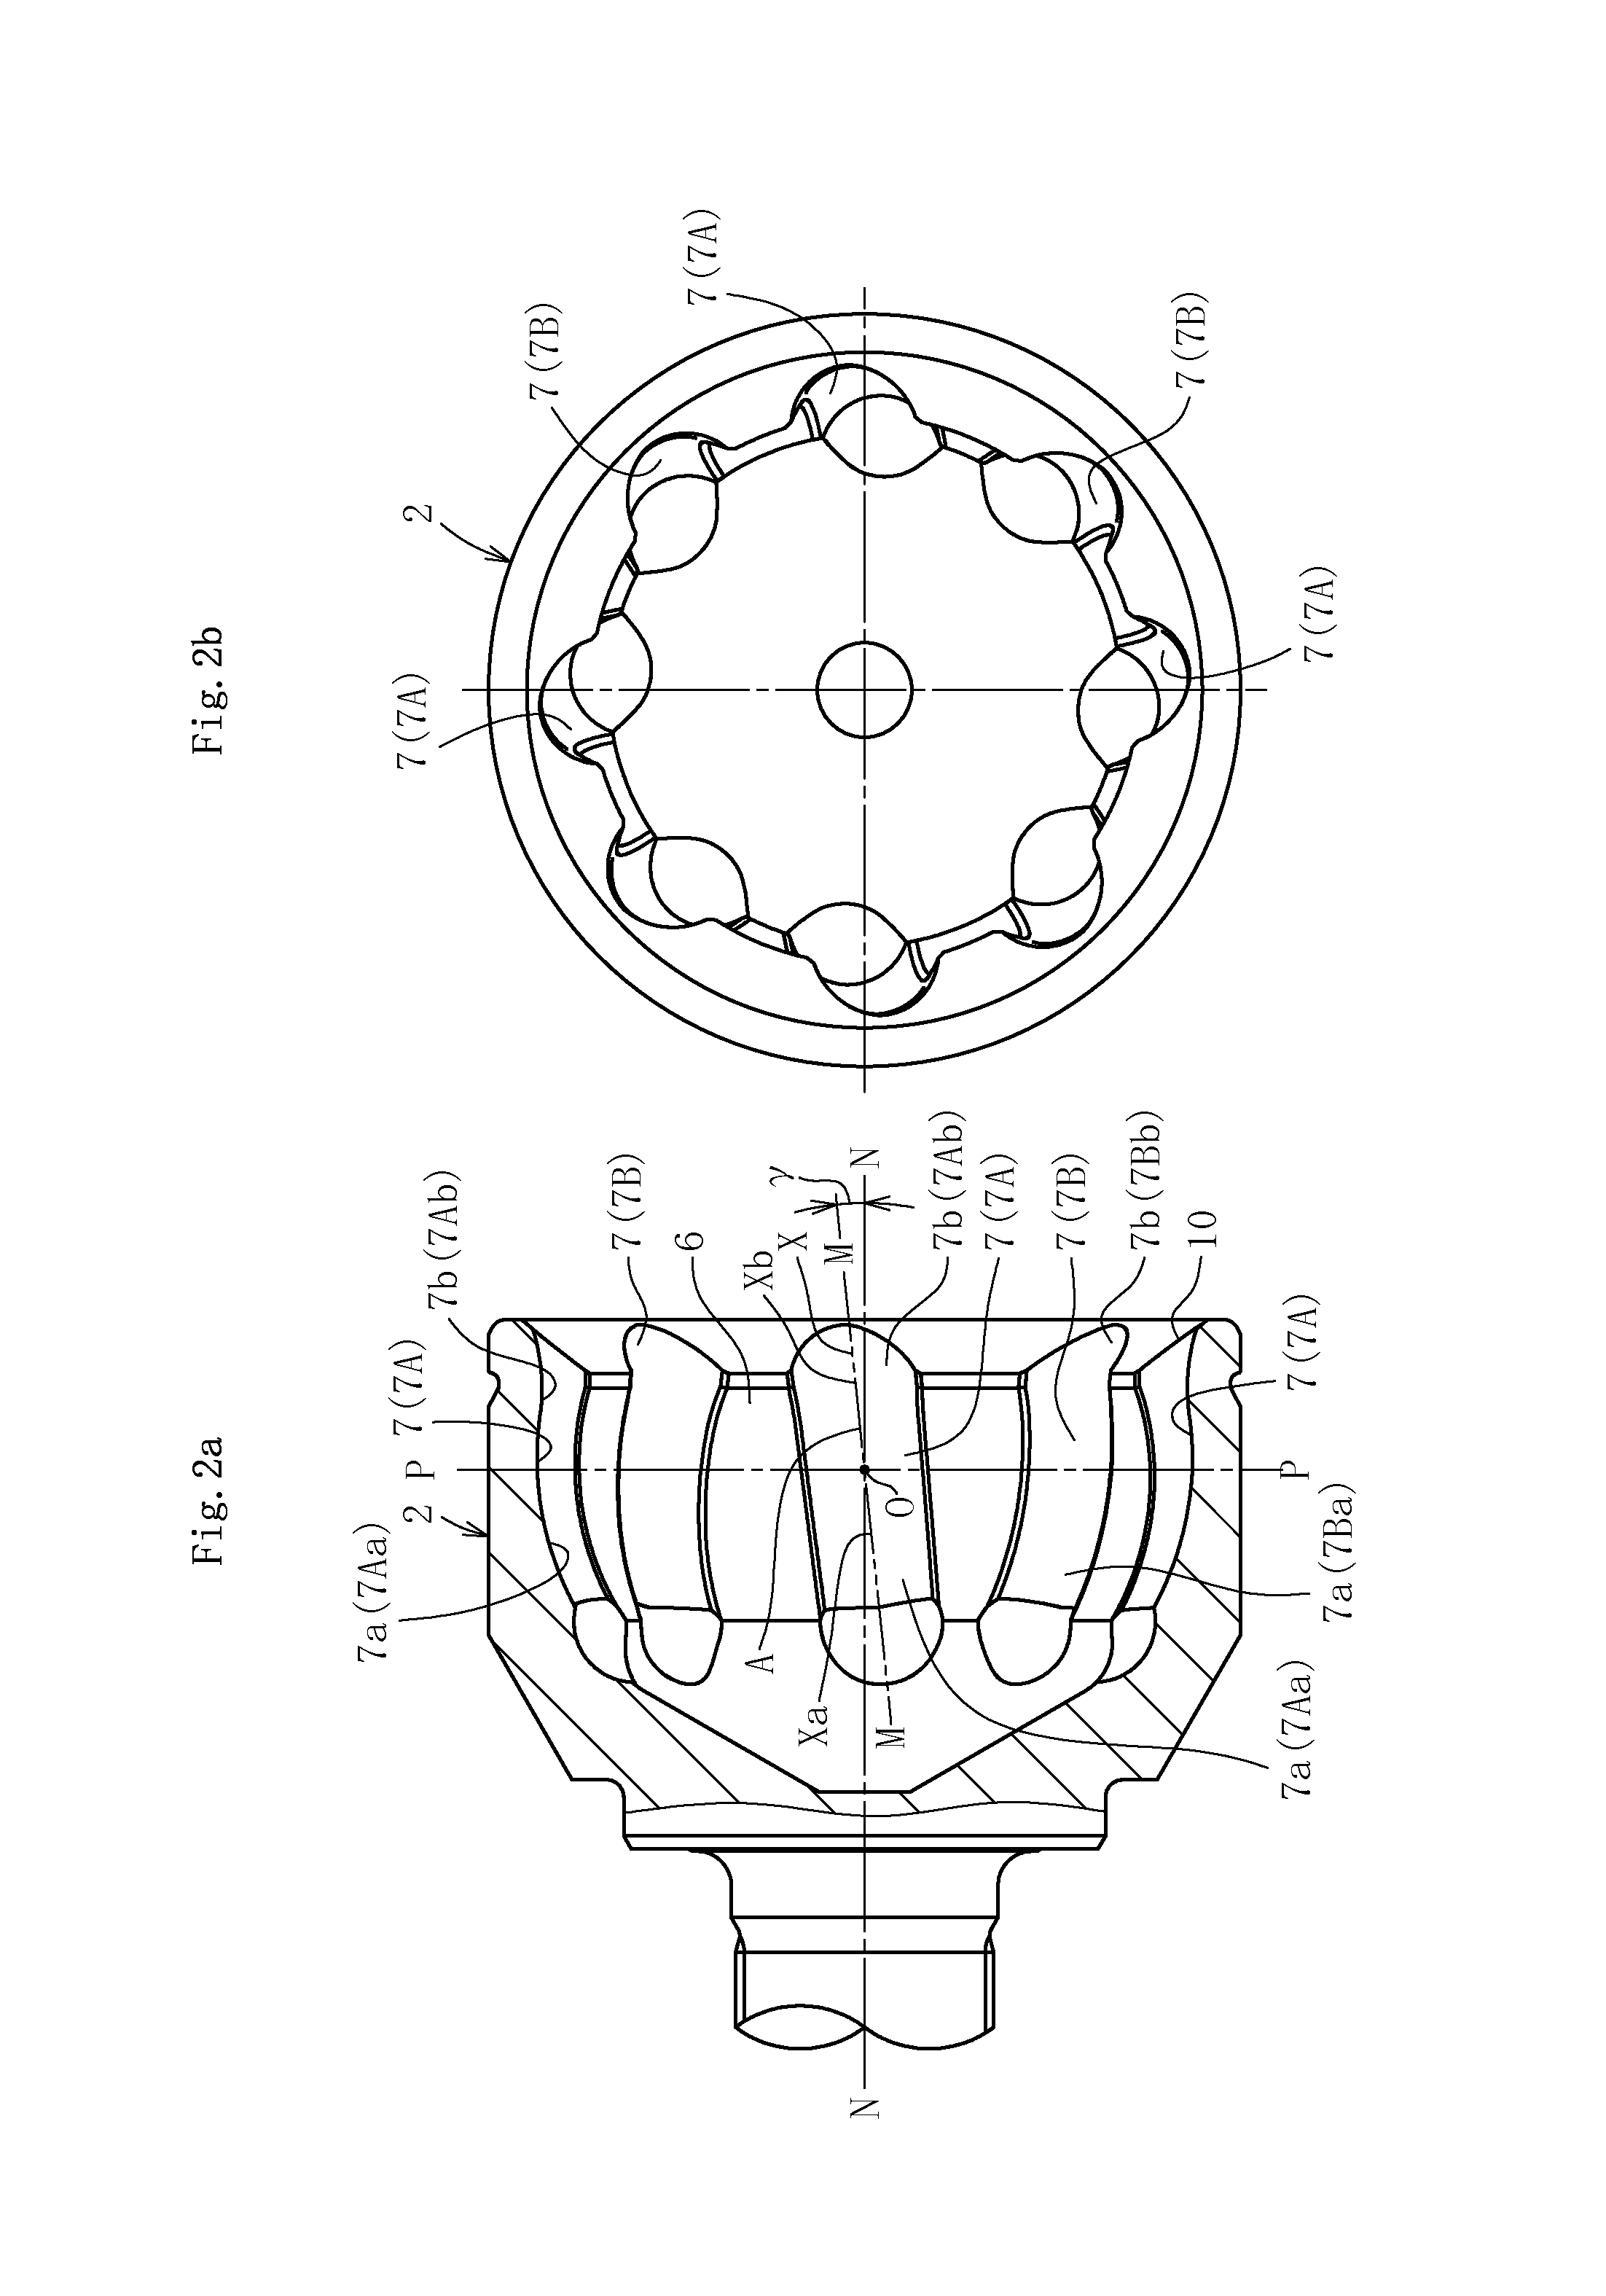 Fixed type constant-velocity universal joint